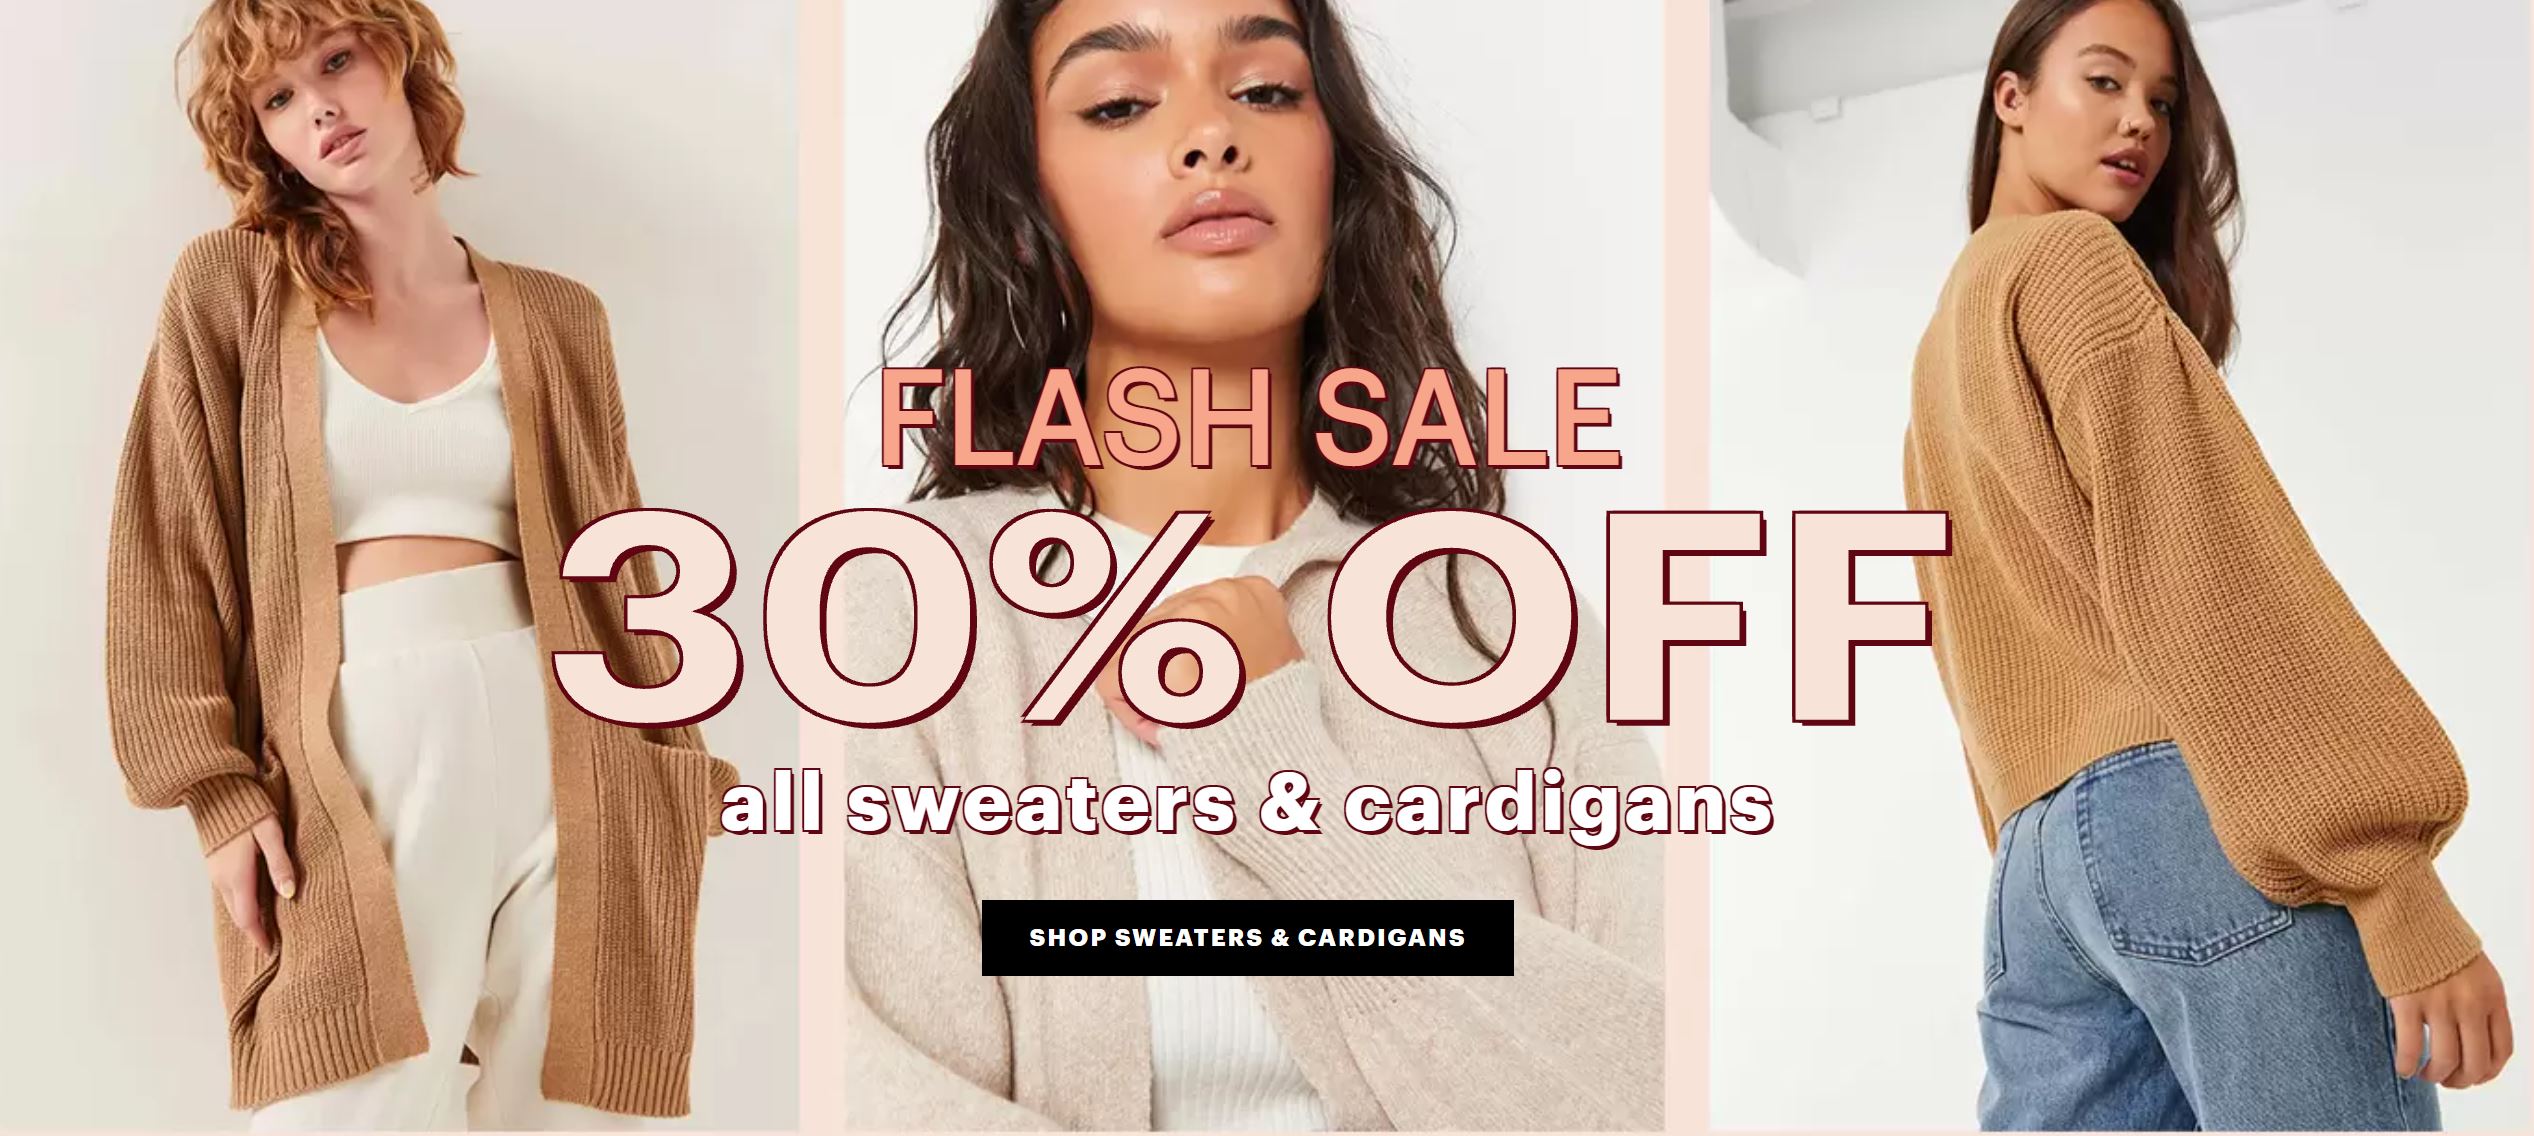 Ardene Canada Deals: Save 30% OFF Flash Sale + 20% OFF New Arrivals ...